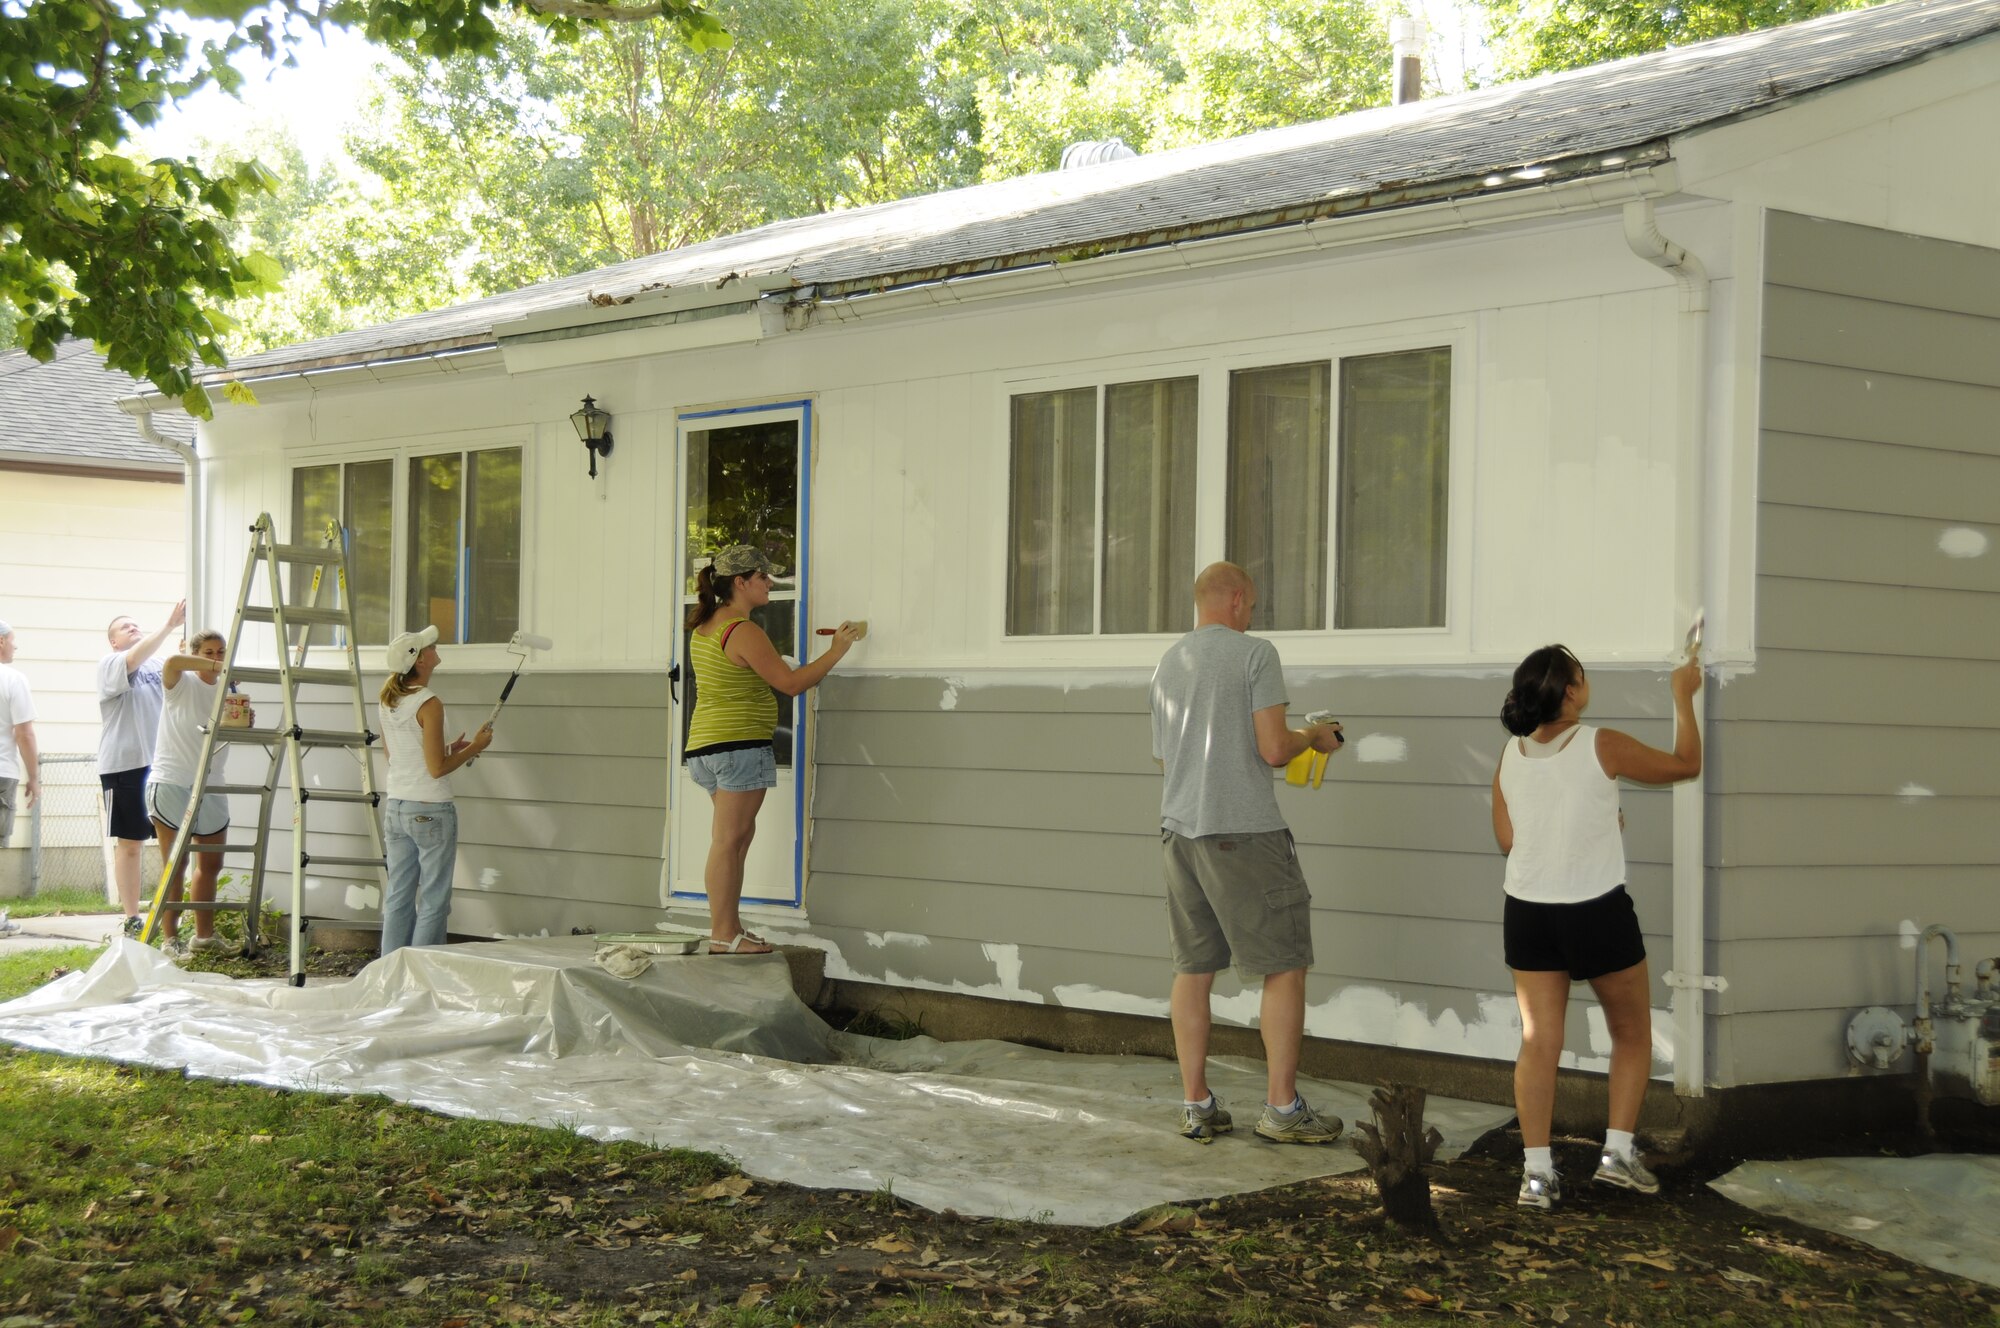 Members from the Nebraska Air and Army National Guard paint a house during the National Paint-a-thon in Lincoln, Neb. on Aug. 13, 2011. The Paint-a-thon is a program through the Lincoln Action Program to assist disabled, elderly, or financially unstable homeowners to preserve their home with a fresh coat of paint.  (Nebraska Air National Guard photo by Master Sergeant Vern Moore) (Released)